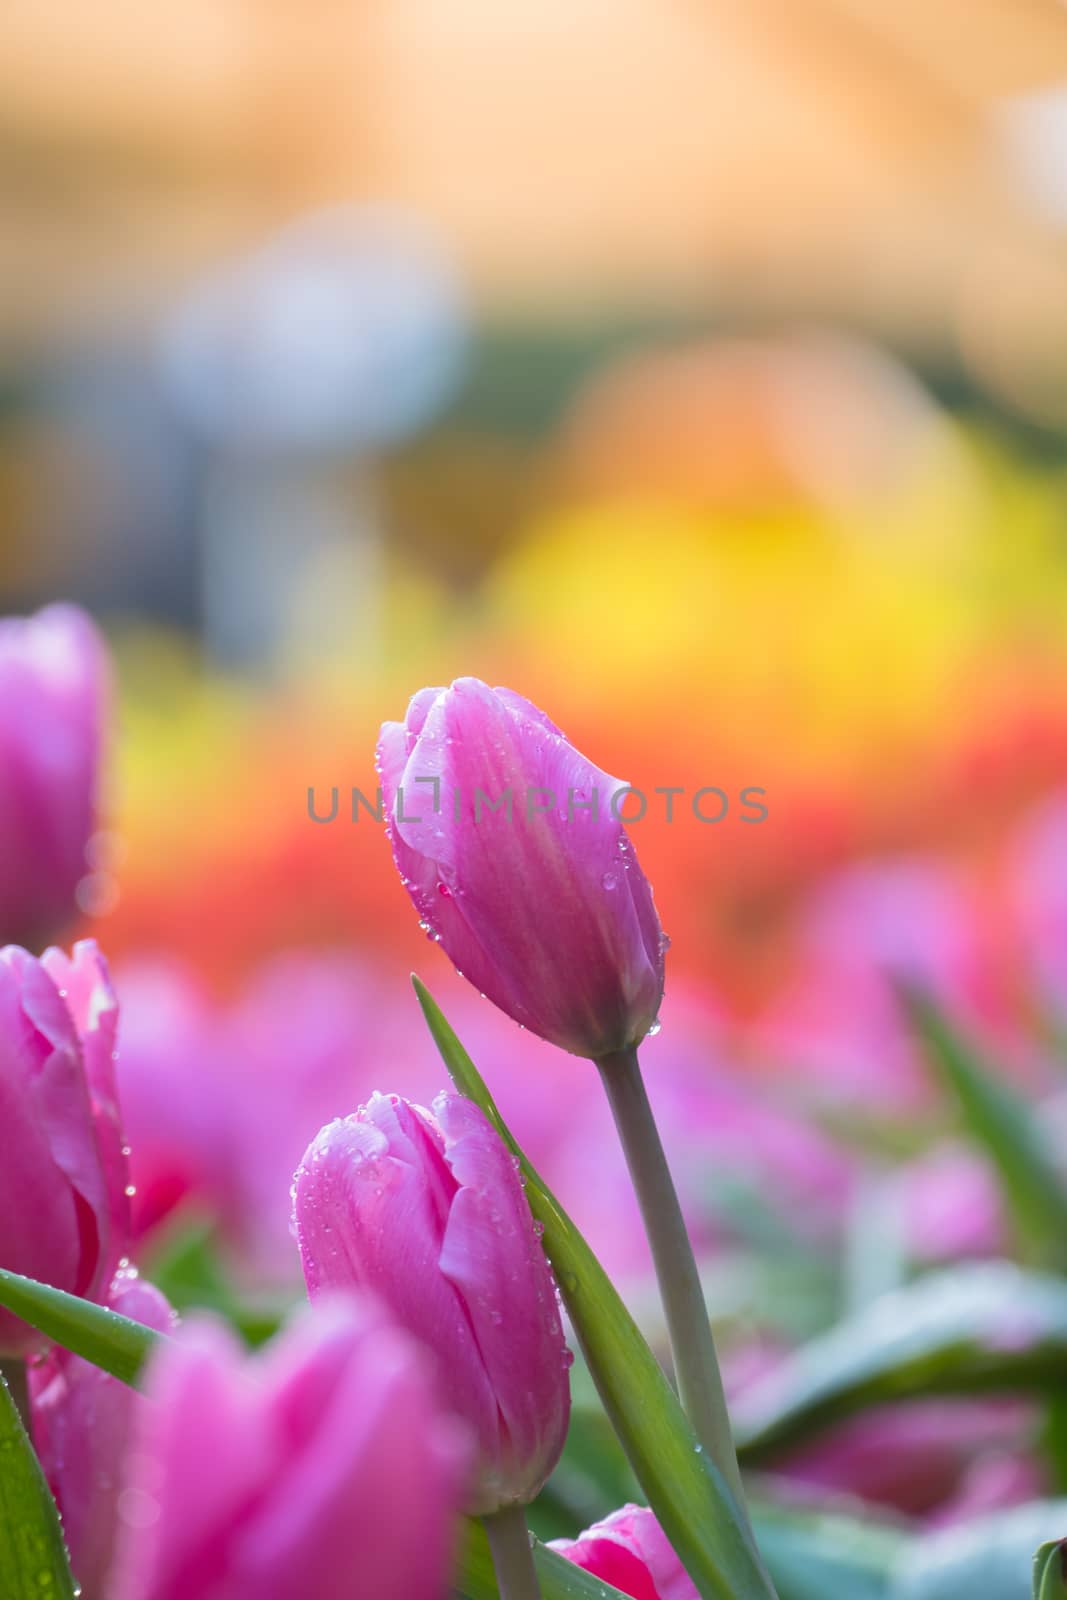 Tulip. Beautiful bouquet of tulips. colorful tulips. by teerawit